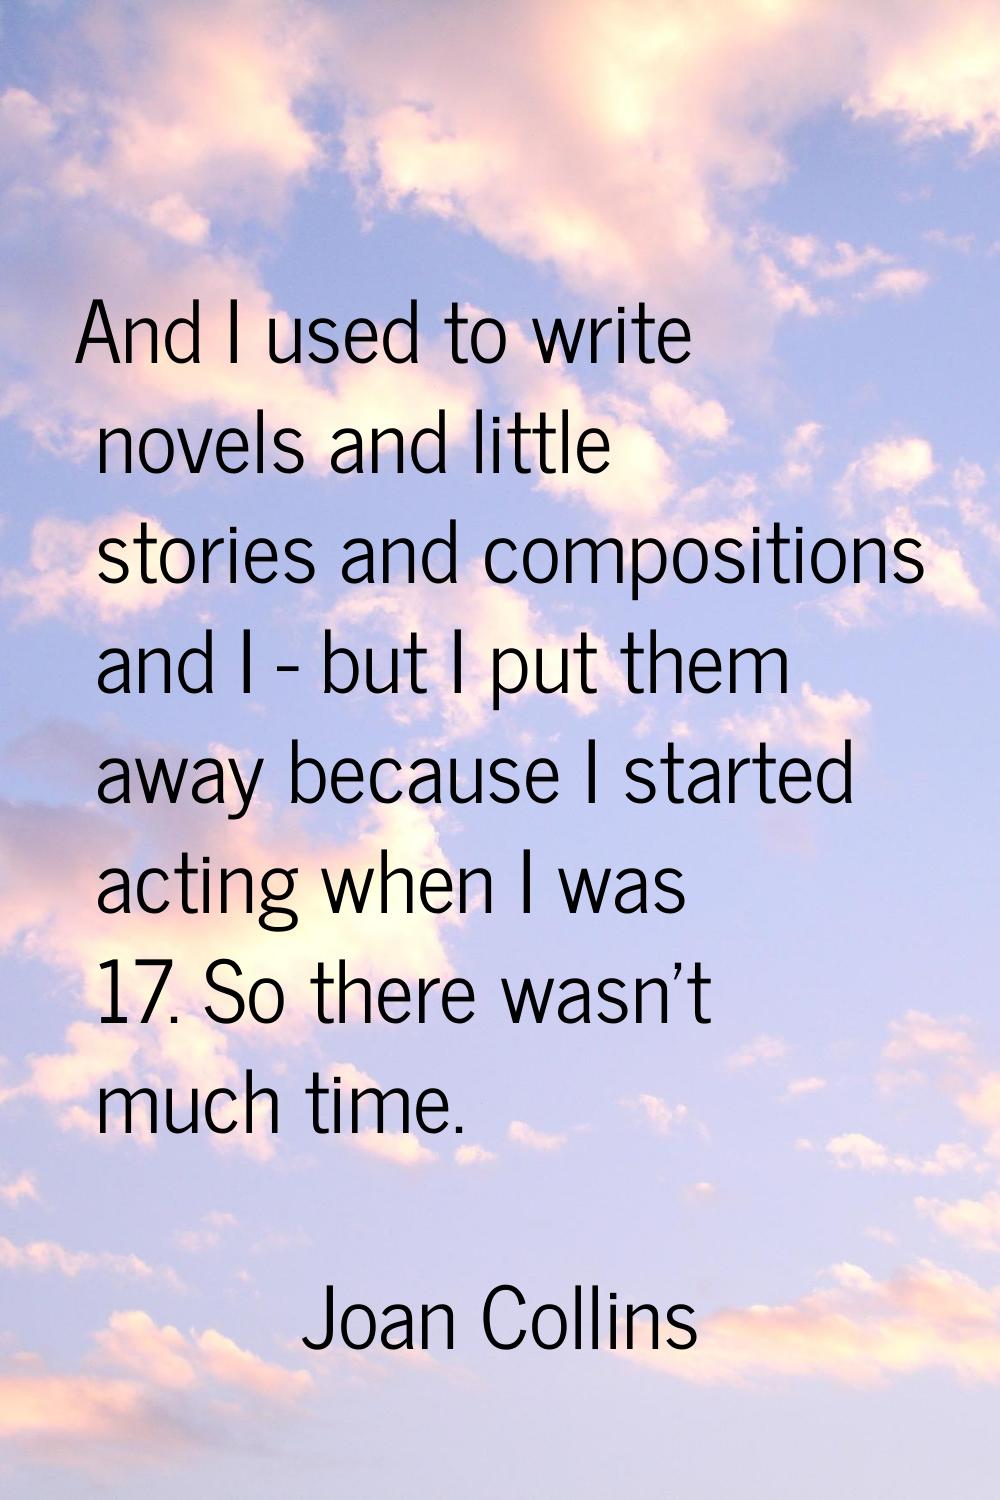 And I used to write novels and little stories and compositions and I - but I put them away because 